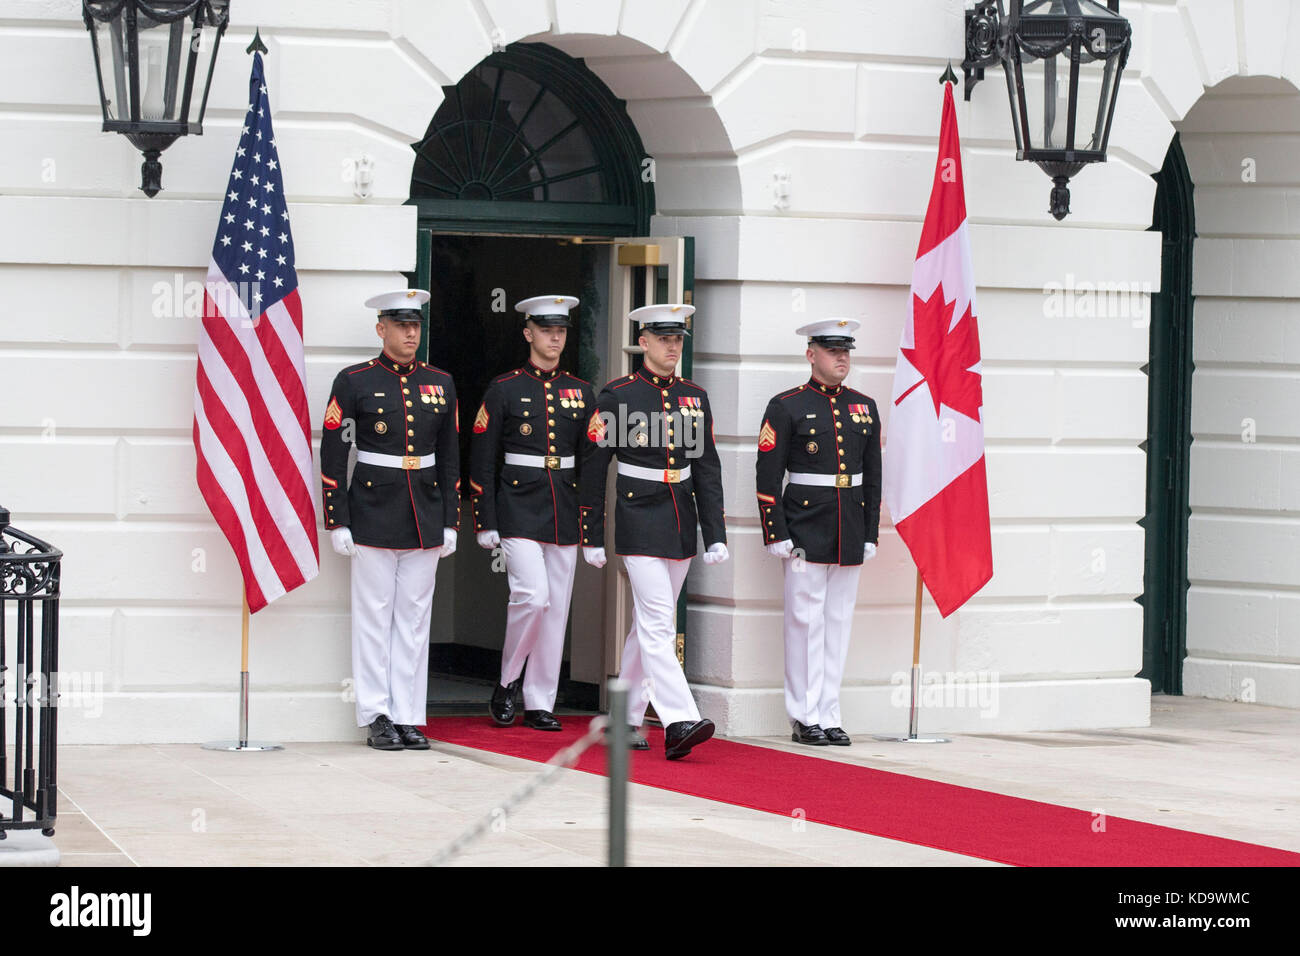 Washington DC, USA. 11th Oct, 2017. United States Marines walk through the doors of the South portico of the White House prior to the arrival of the Prime Minister of Canada Justin Trudeau and his wife Sophie Grégoire at the White House on October 11th, 2017 in Washington, DC Credit: Alex Edelman/CNP /MediaPunch Credit: MediaPunch Inc/Alamy Live News Stock Photo